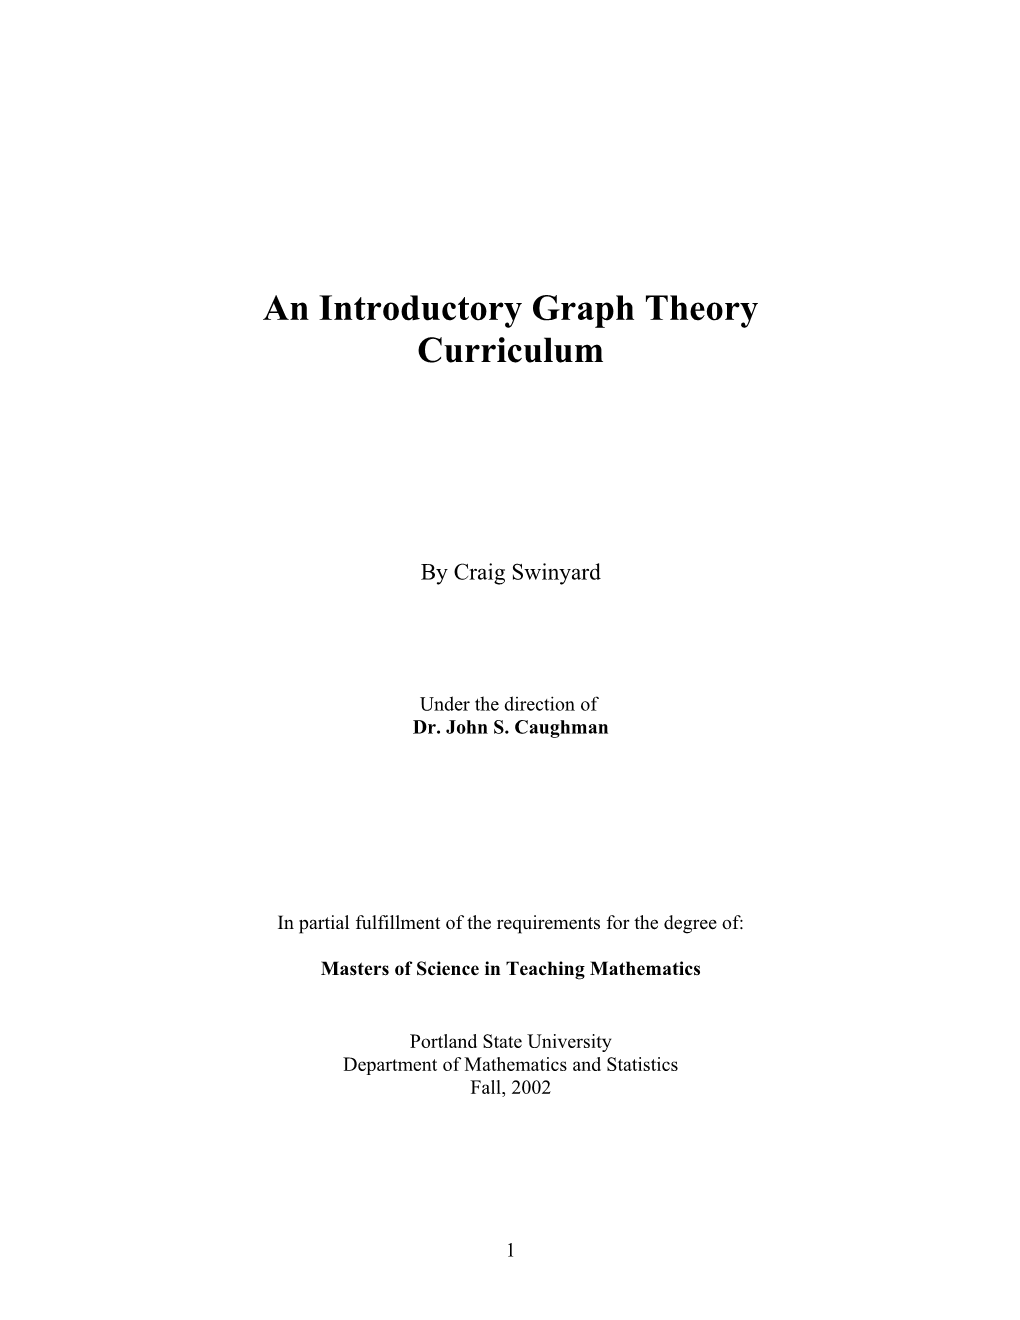 Why an Intro Course in Graph Theory